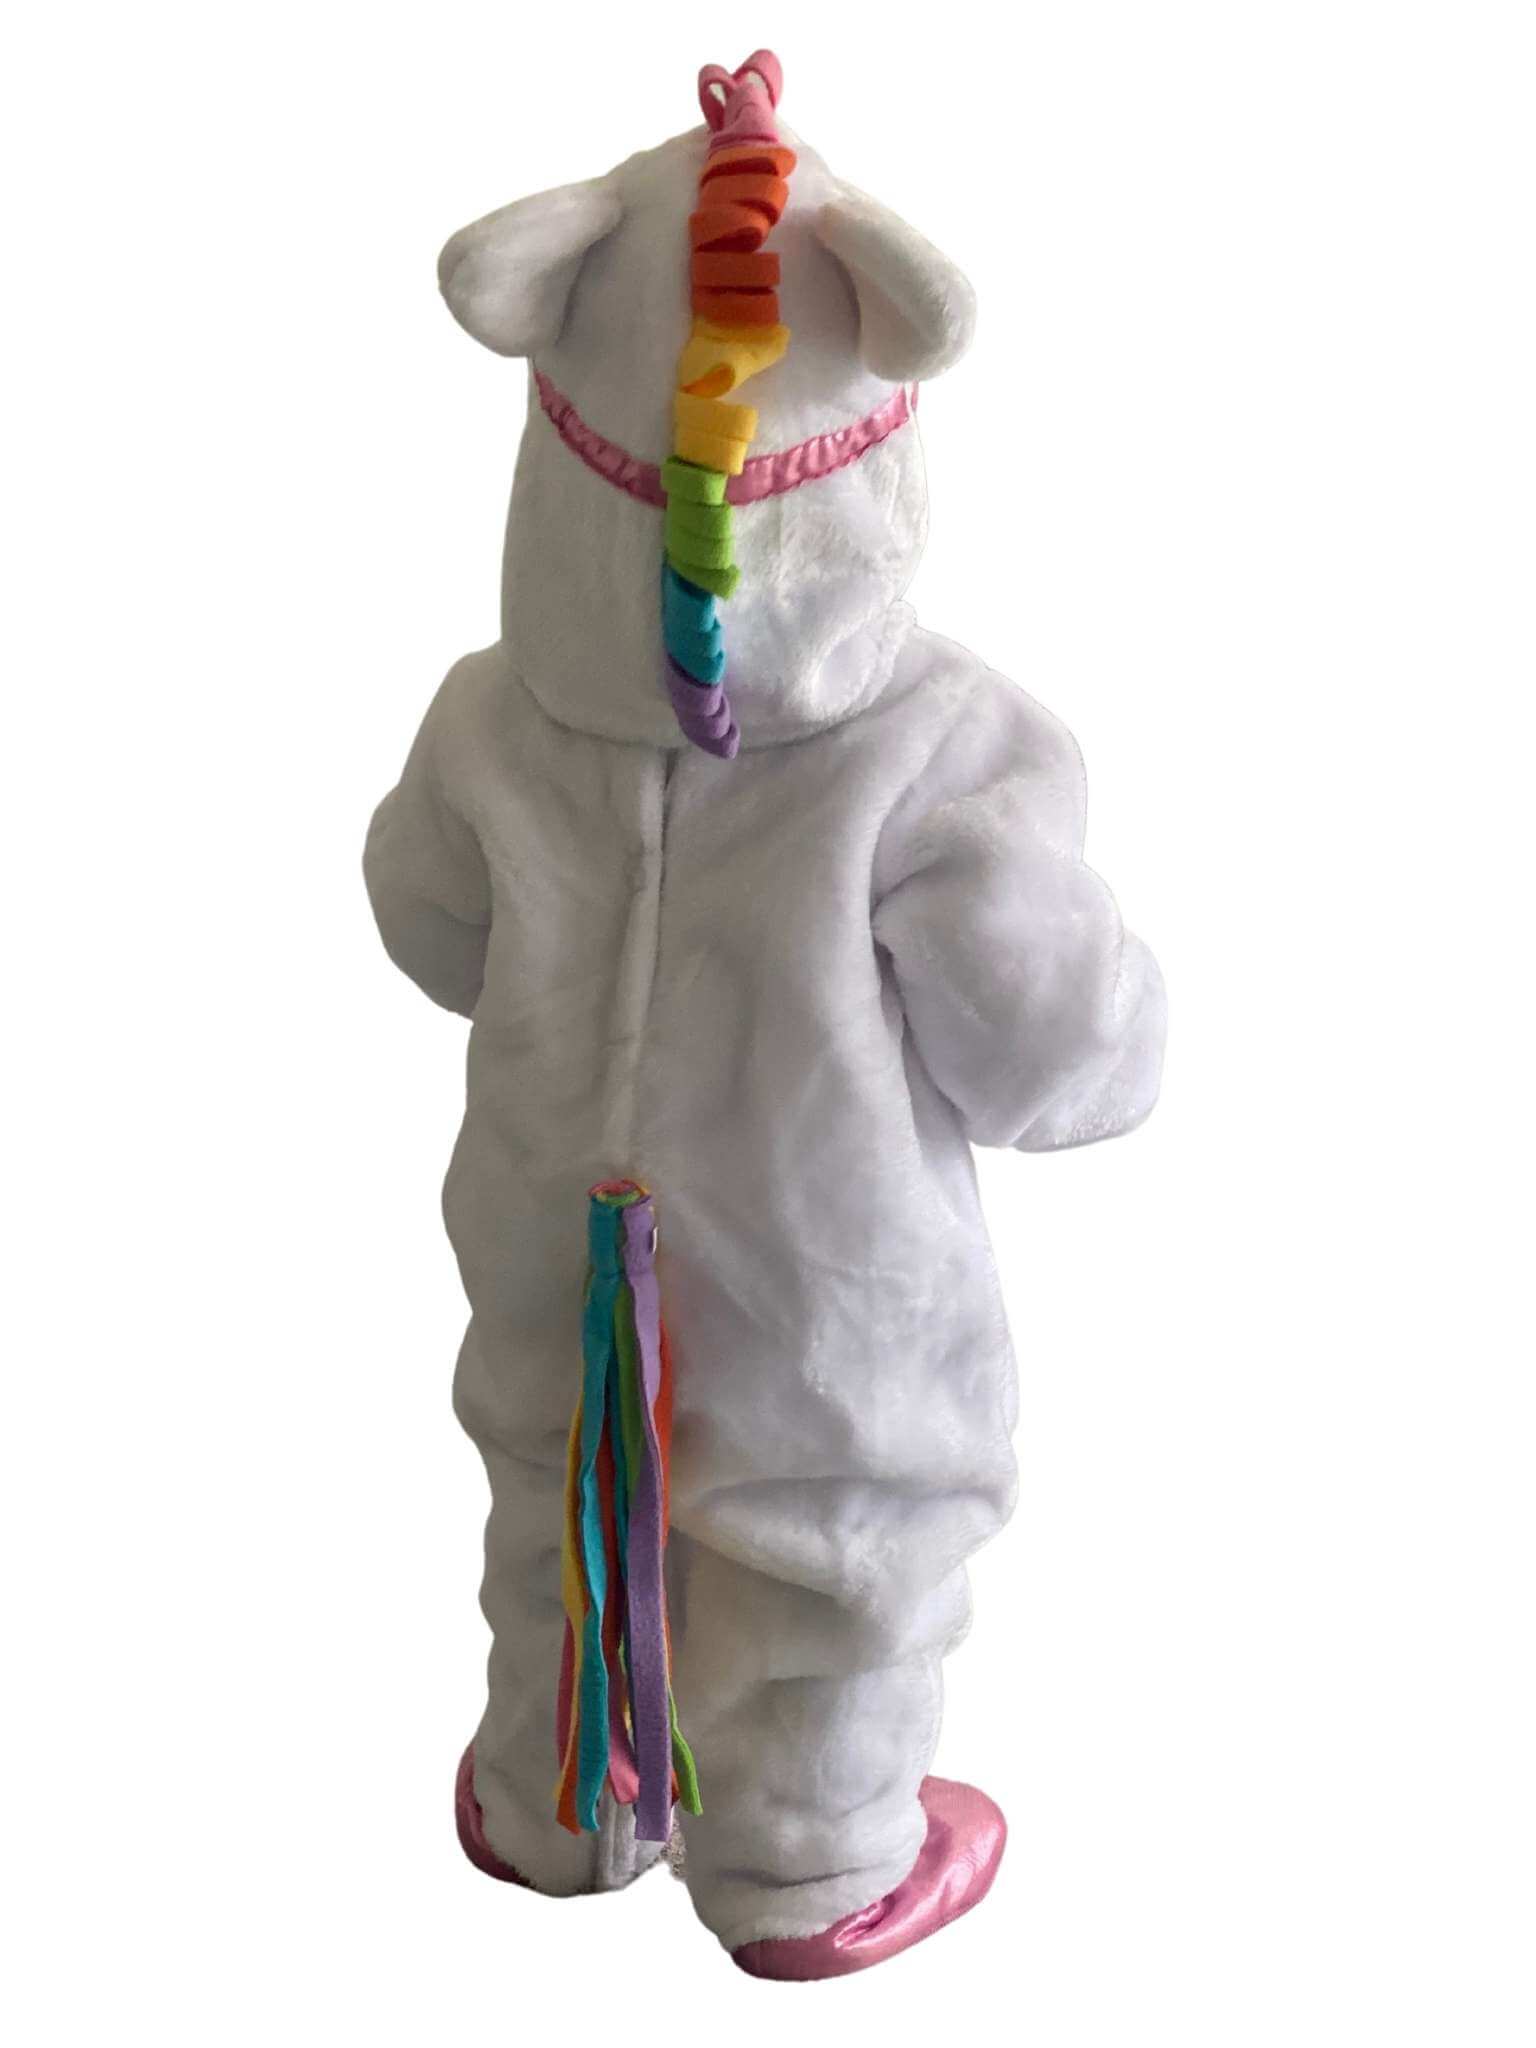 Back of the toddler wearing with the unicorn costume showing the colourful tail and main.